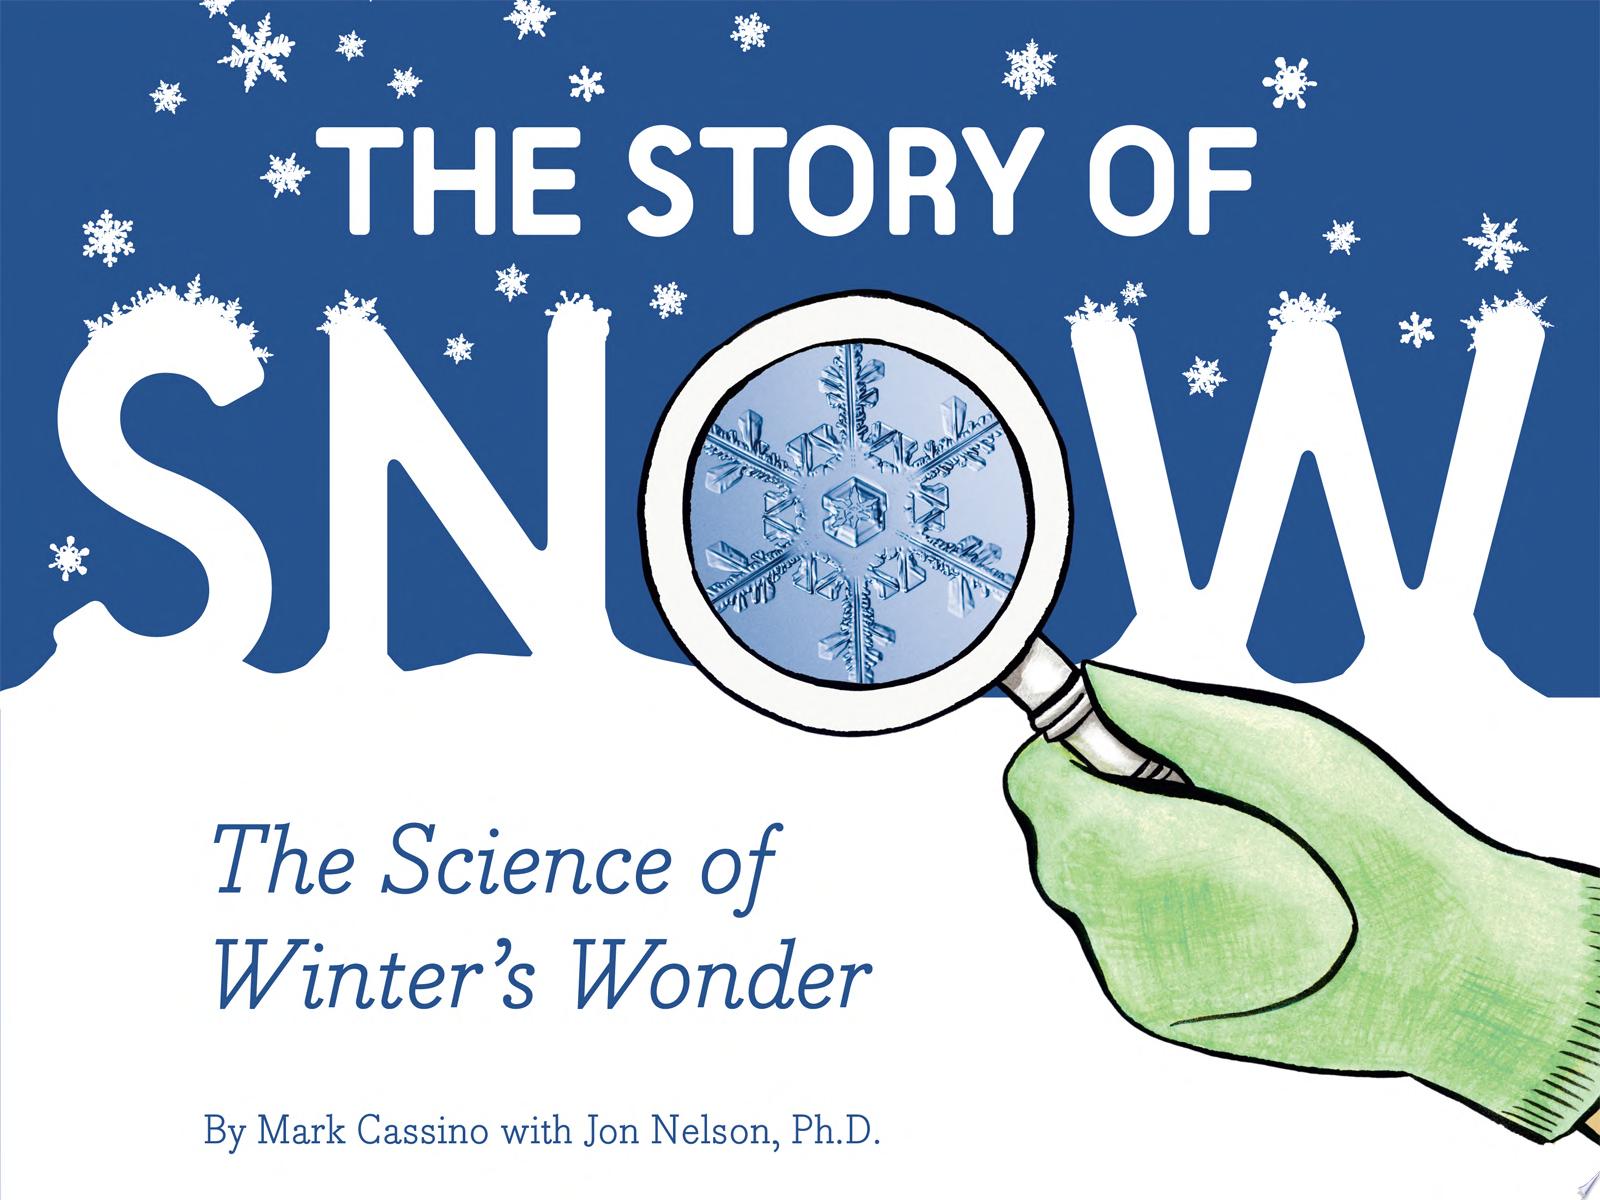 Image for "The Story of Snow"